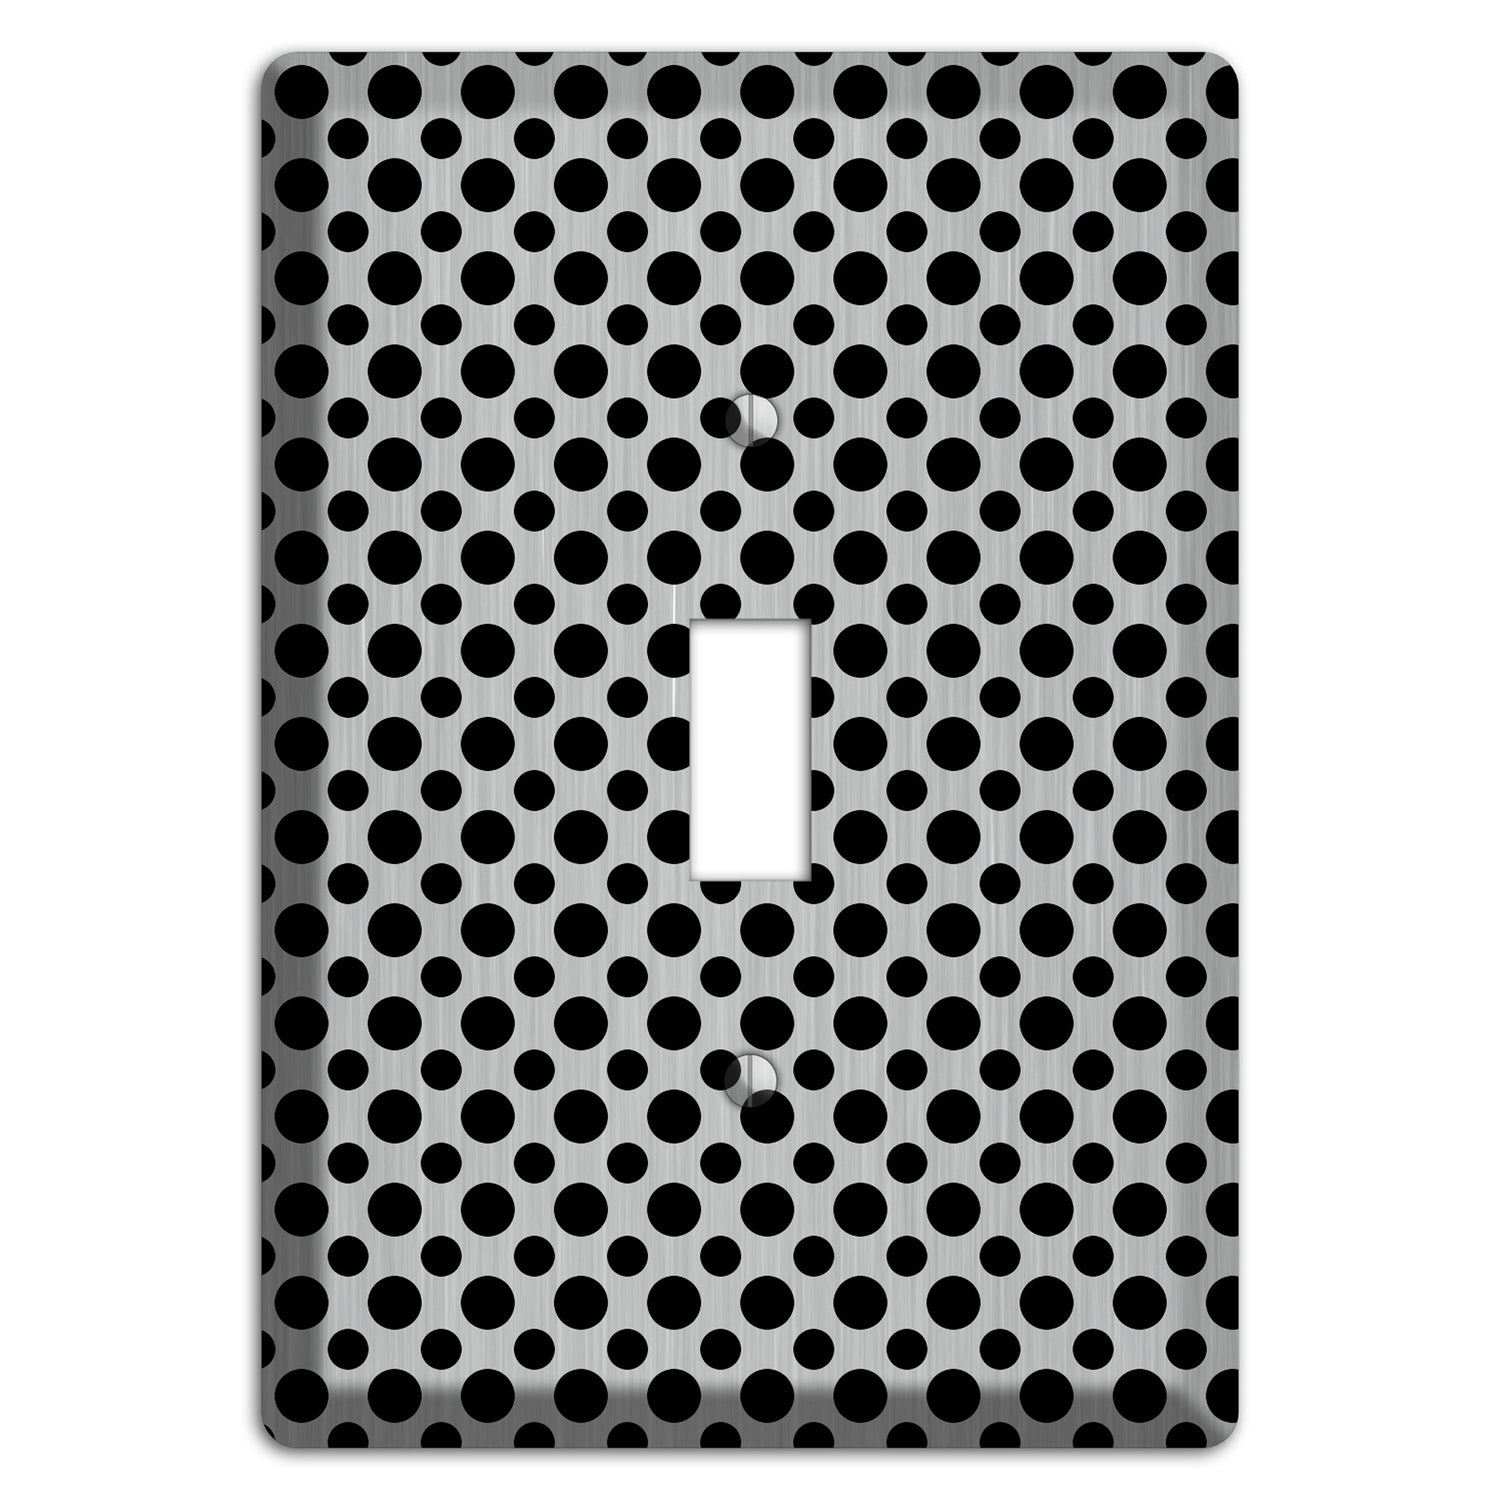 Multi Small Polka Dots Stainless Cover Plates